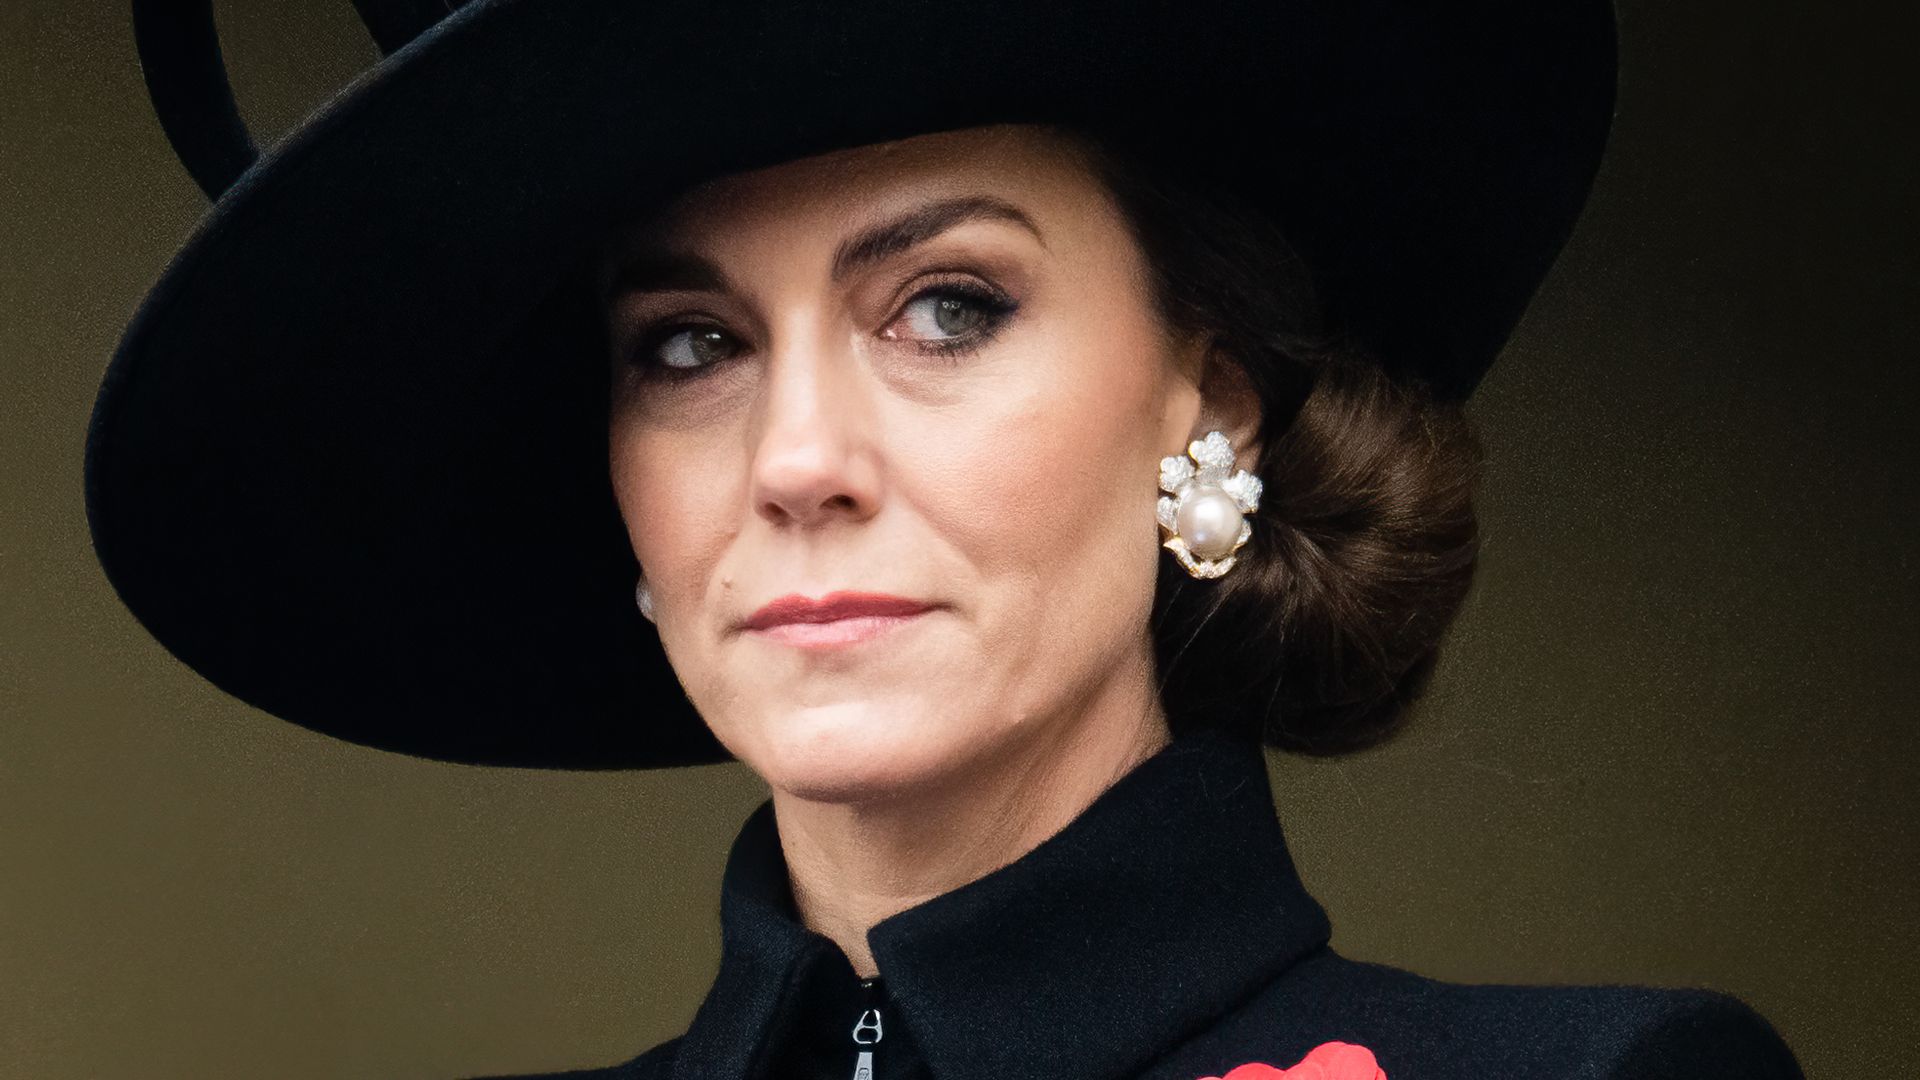 Why Princess Kate is our new beauty queen